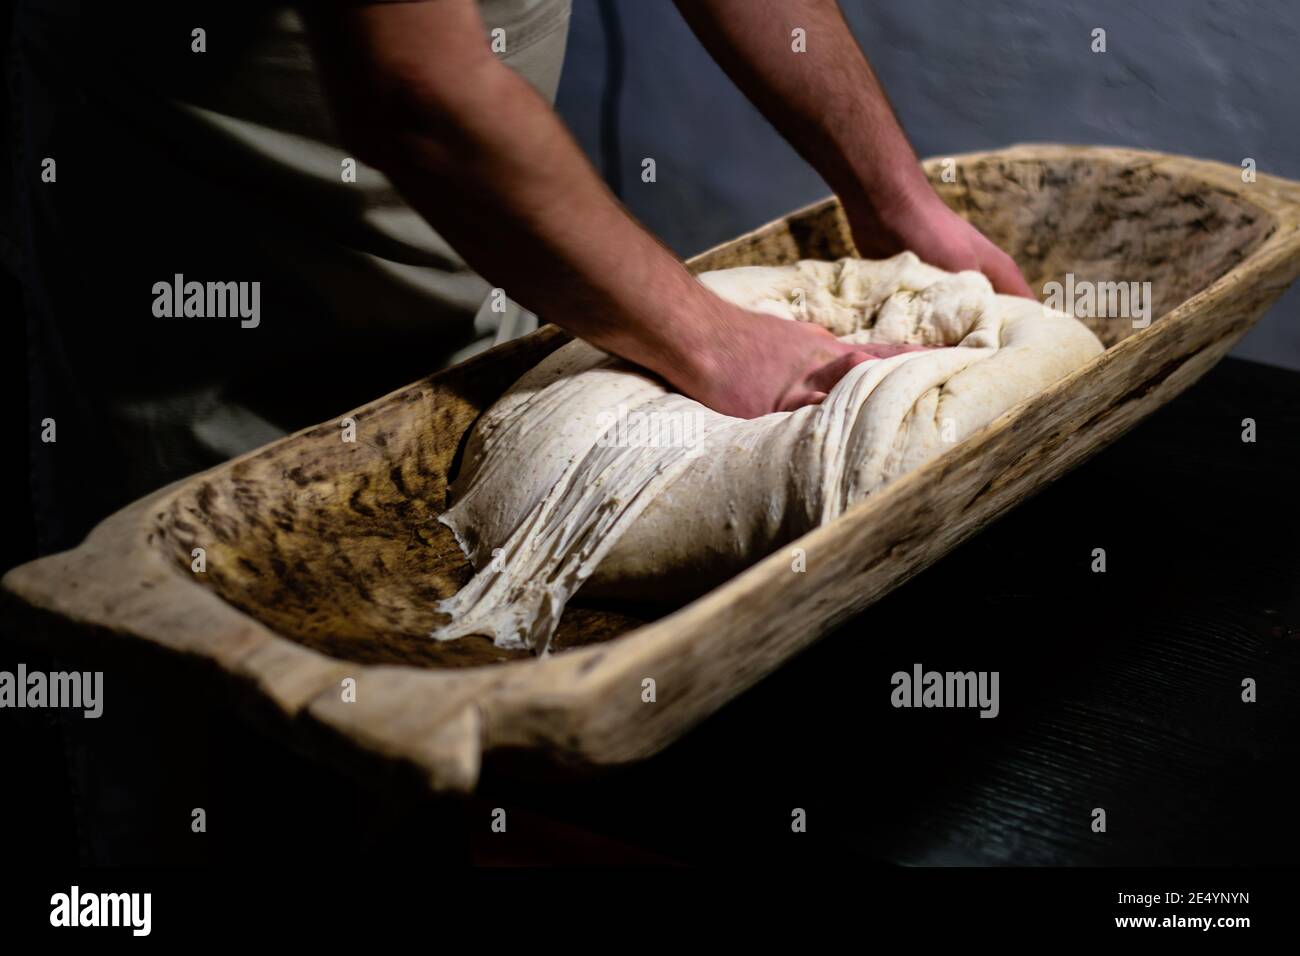 https://c8.alamy.com/comp/2E4YNYN/kneading-dough-for-the-oven-in-a-traditional-wooden-bread-trough-2E4YNYN.jpg